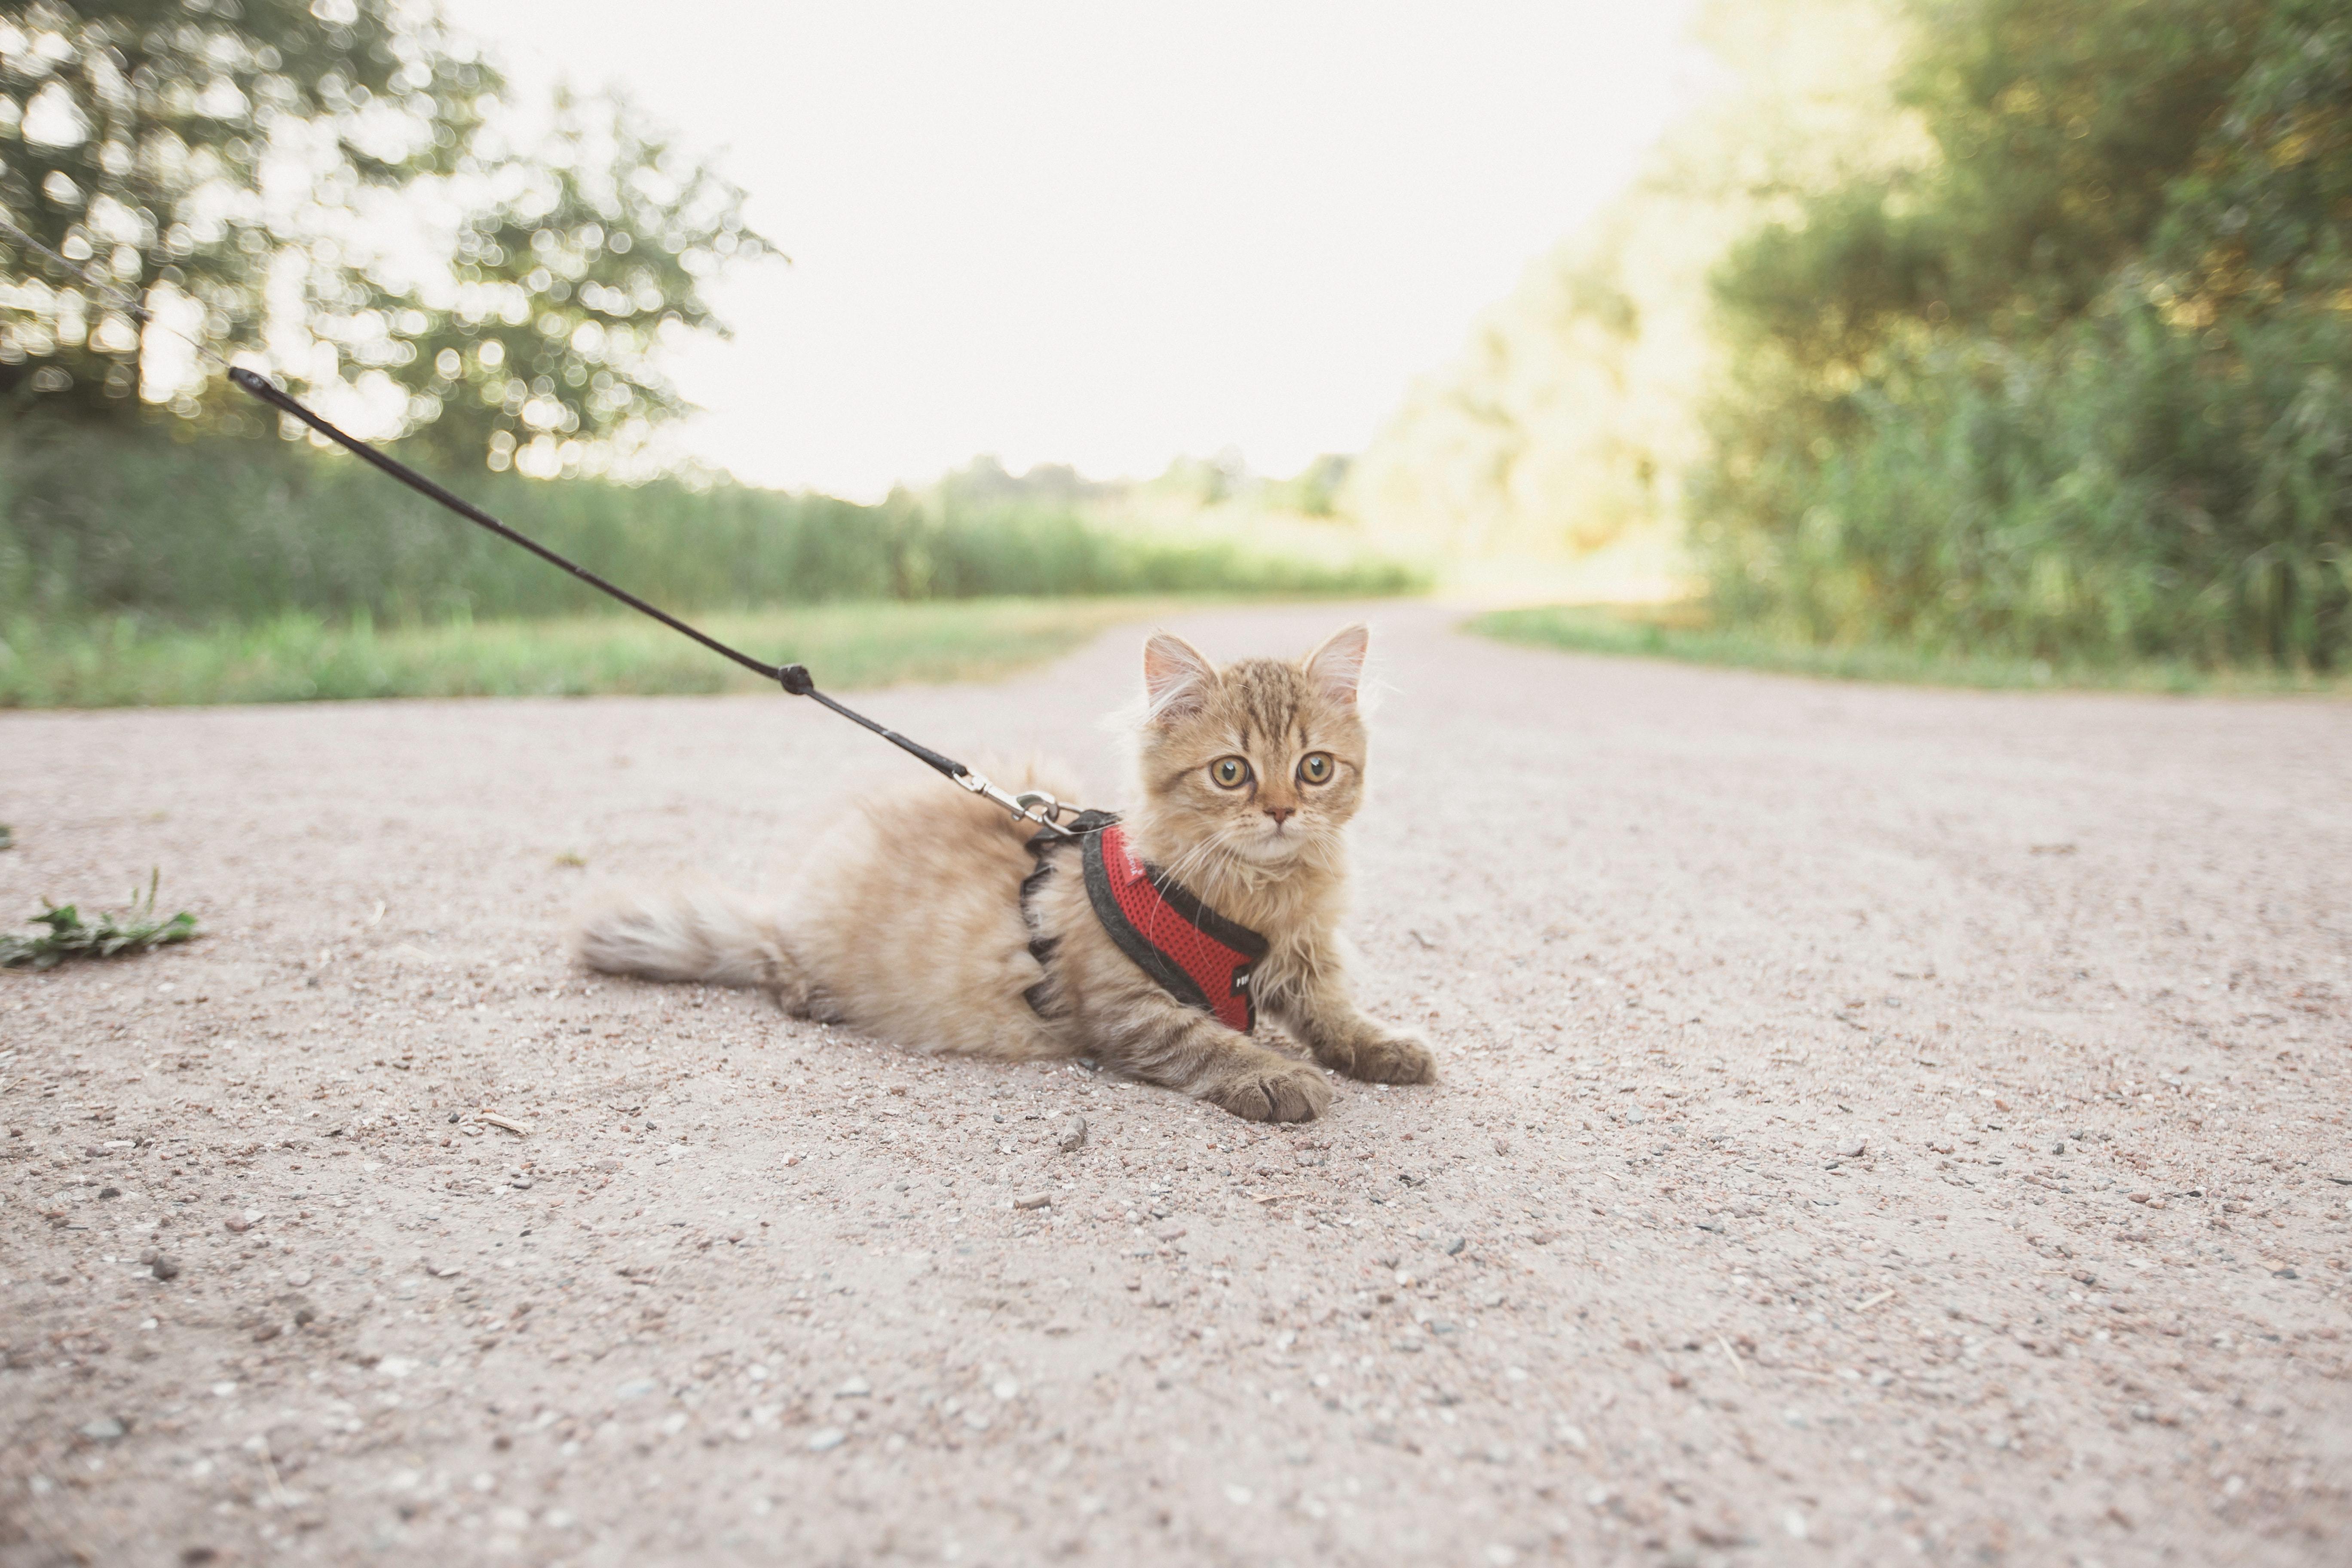 How to Walk Your Cat on a Leash Safely